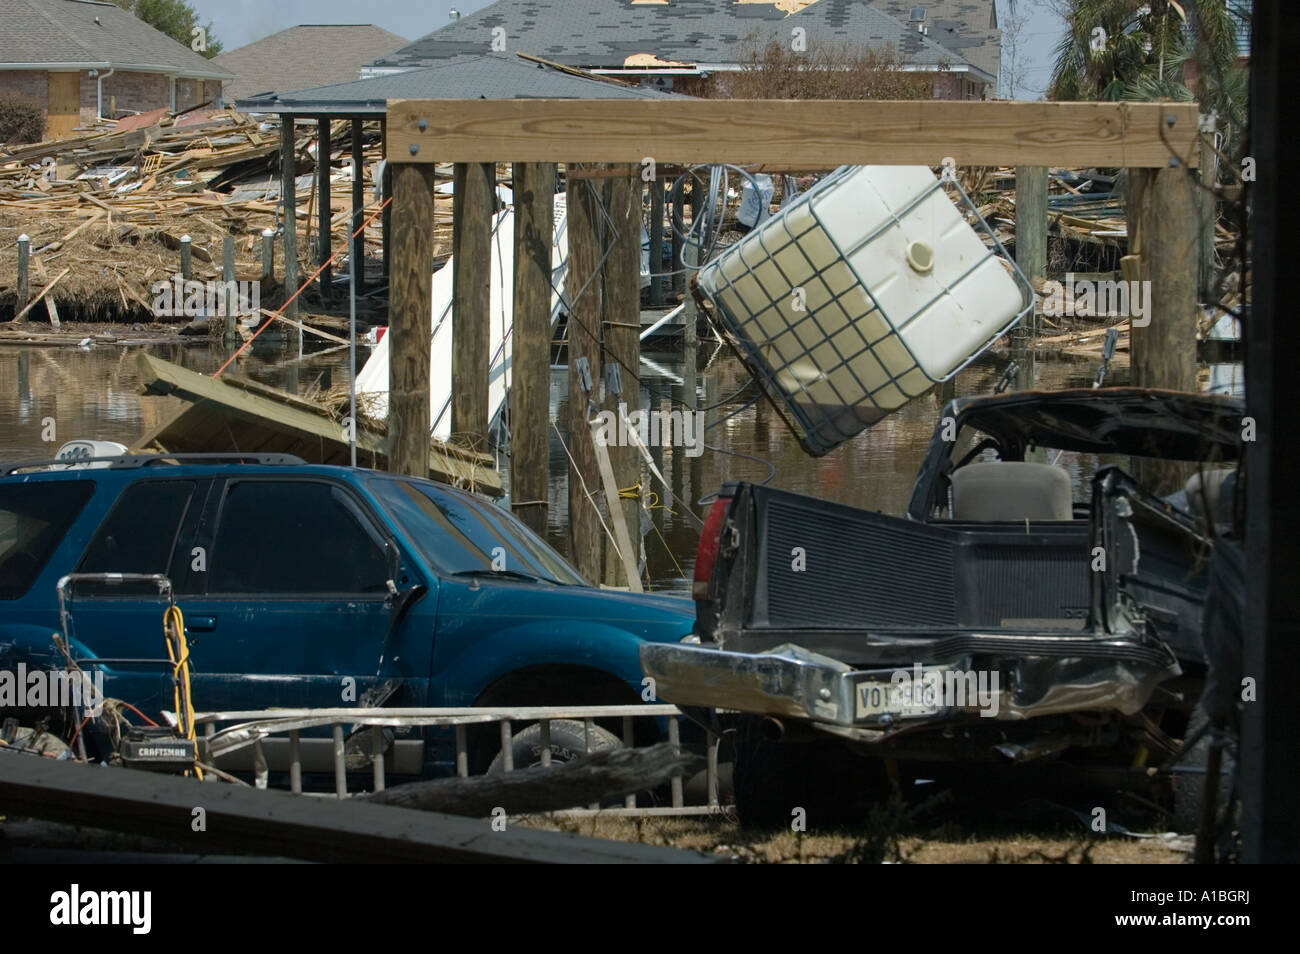 view of Destroyed vehicles on the bank of a river inlet in America in the aftermath of Hurricane Katrina 2005 Stock Photo